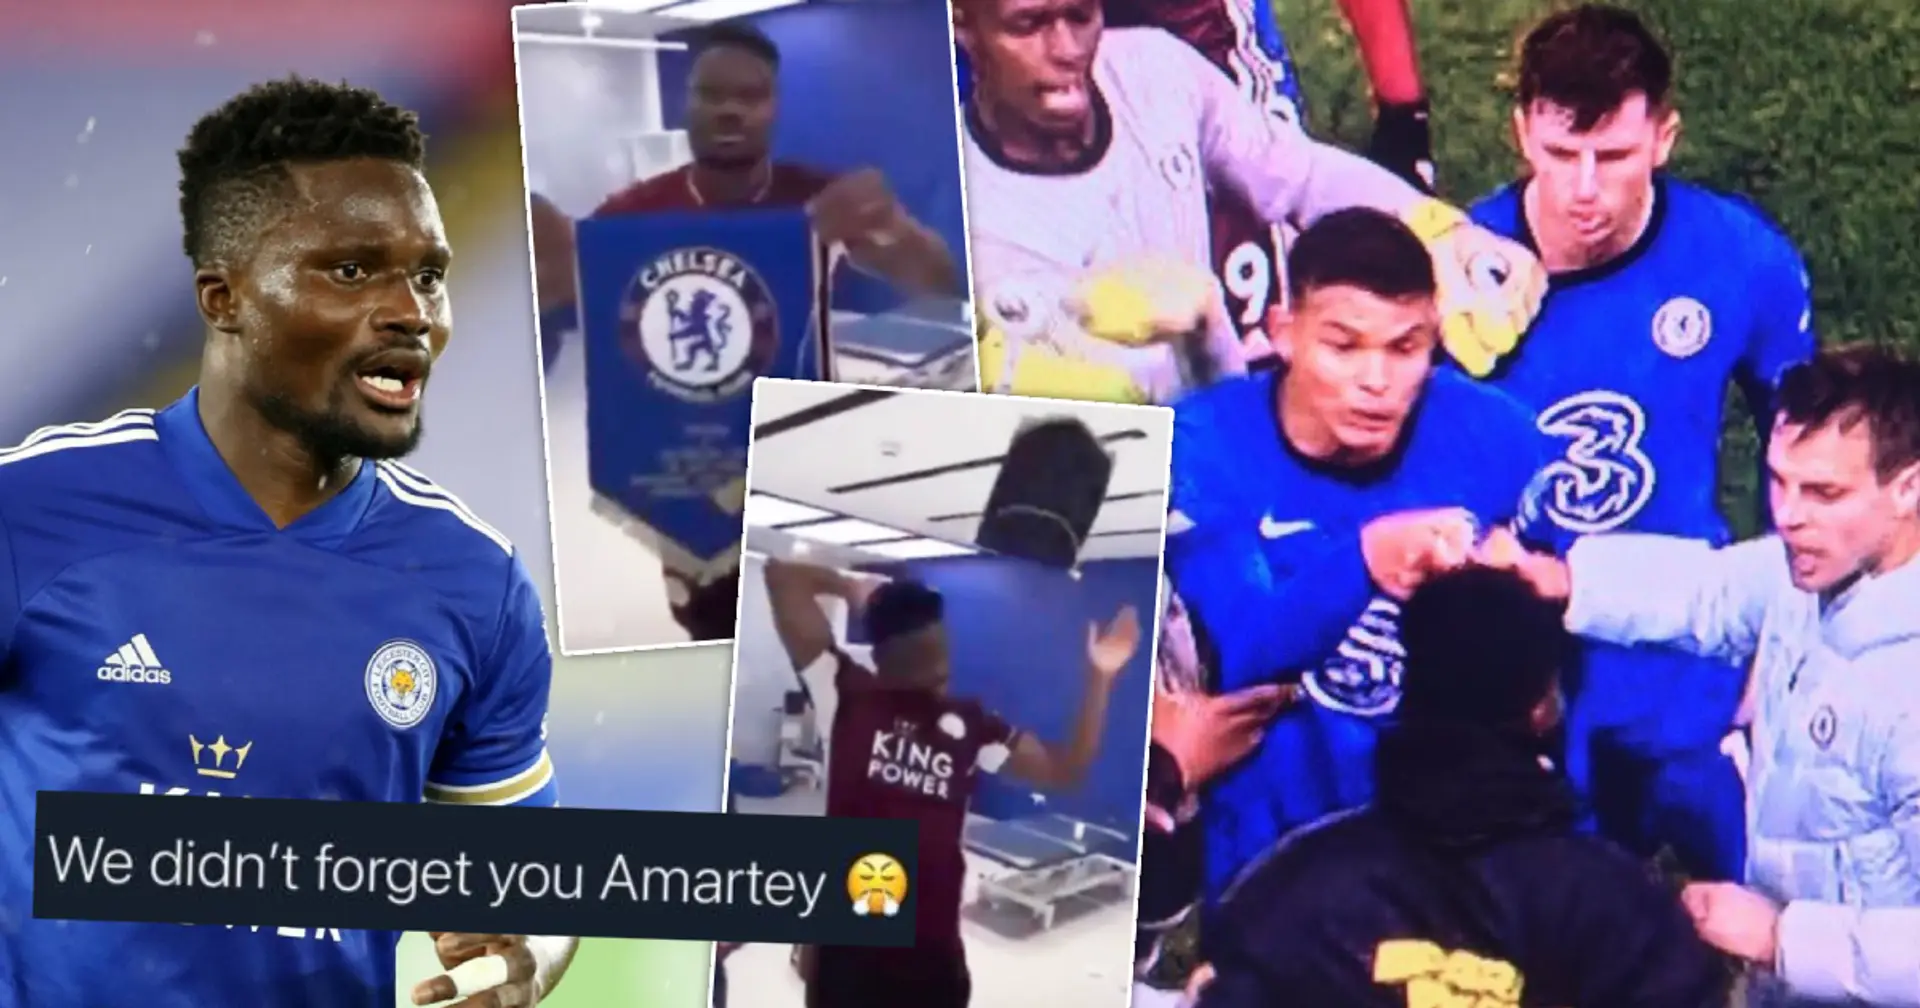 Mount and Silva go mad at Leicester's Amartey who disrespected Chelsea after FA Cup final – Thiago's wife approves